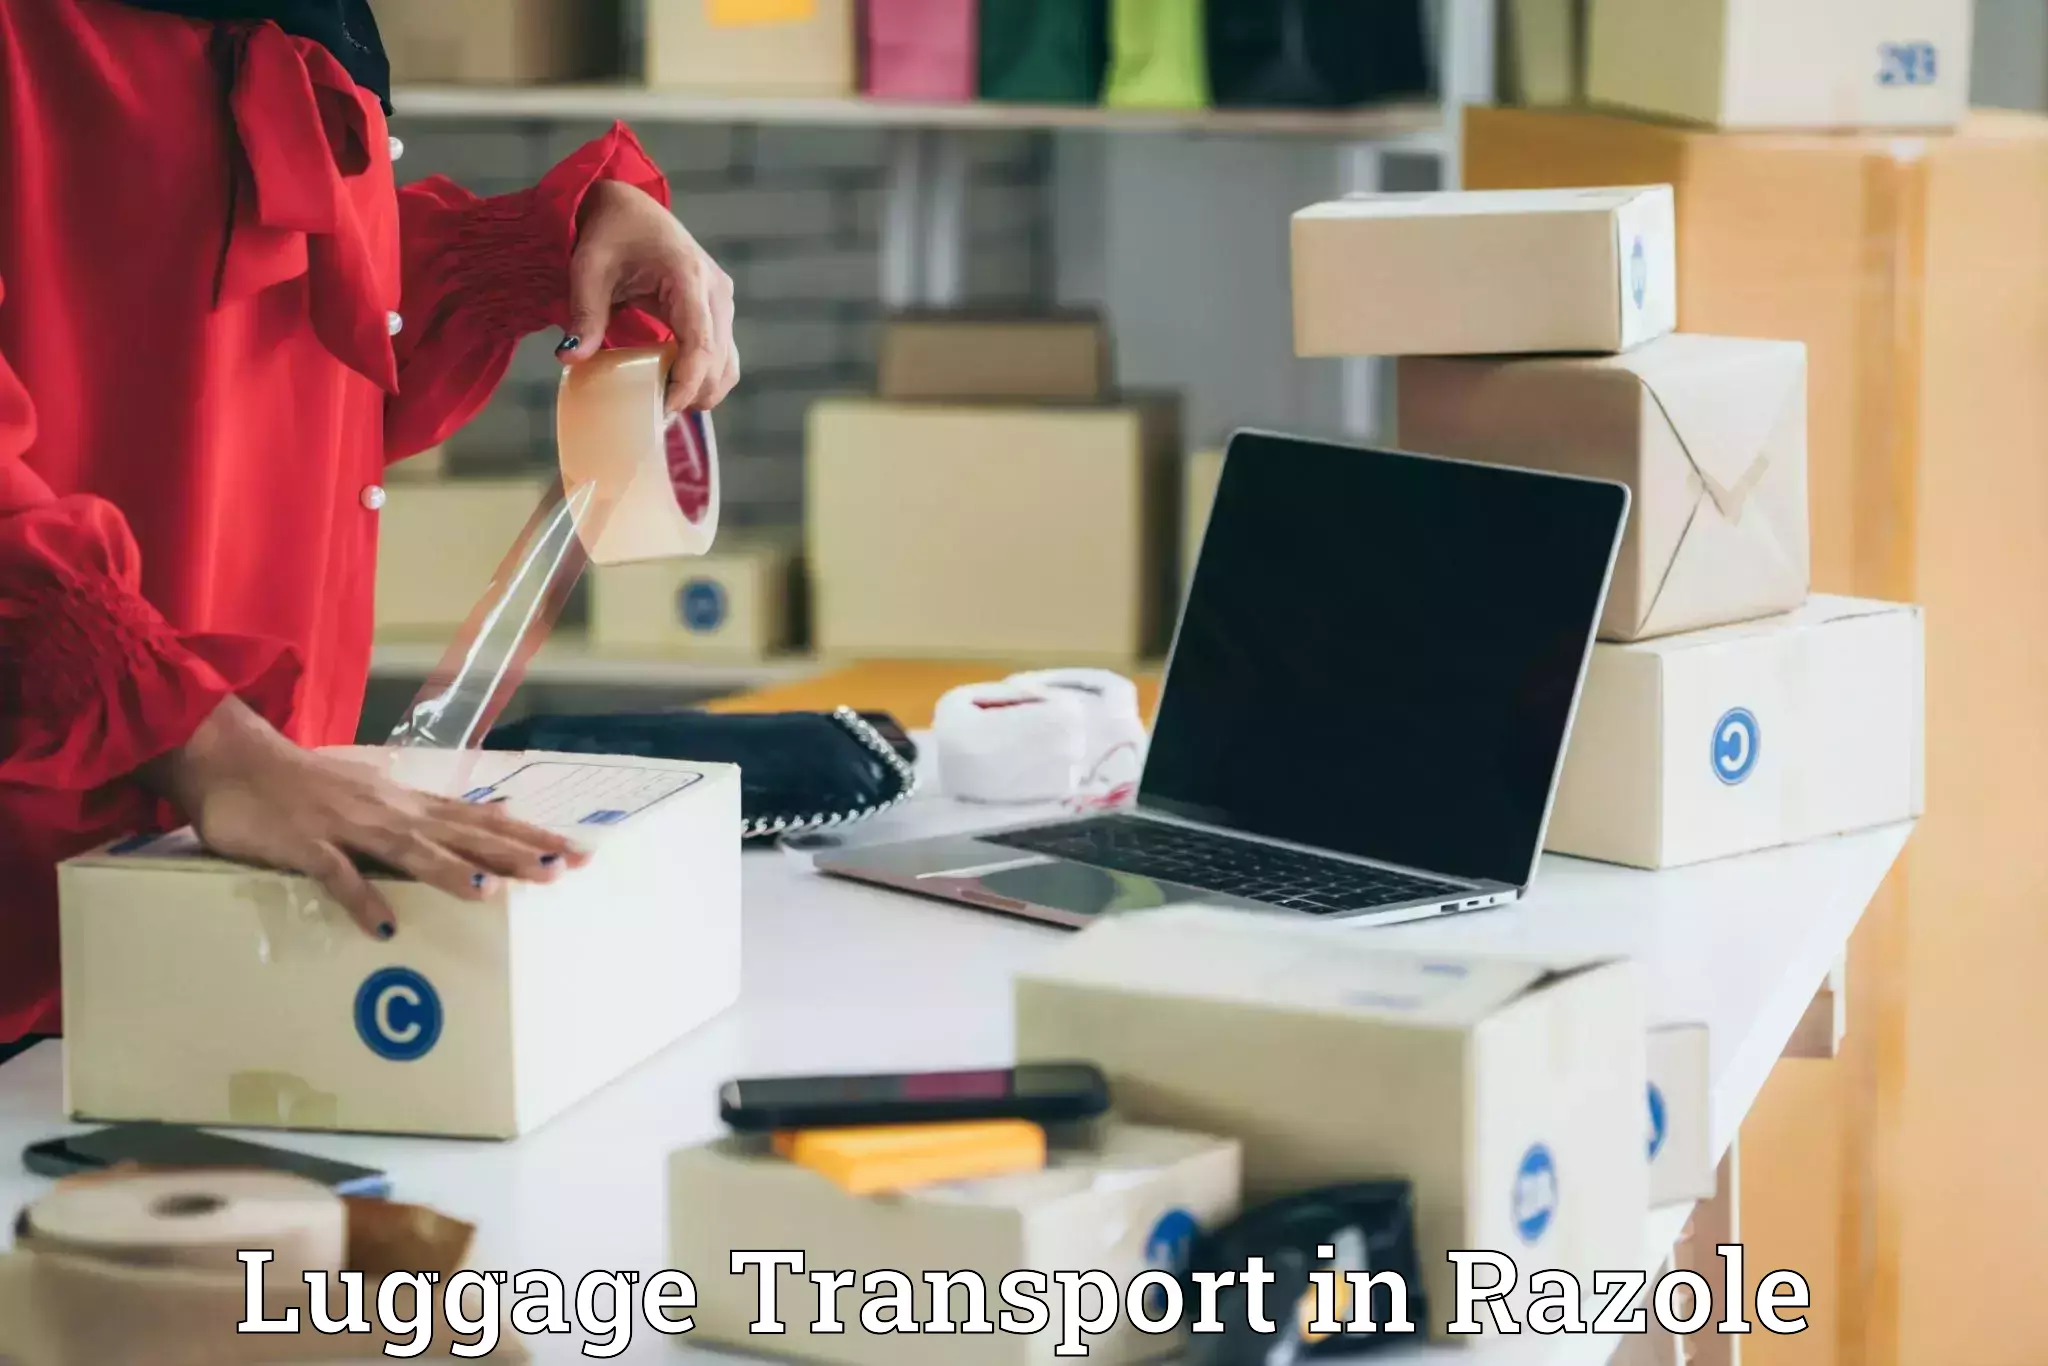 Automated luggage transport in Razole